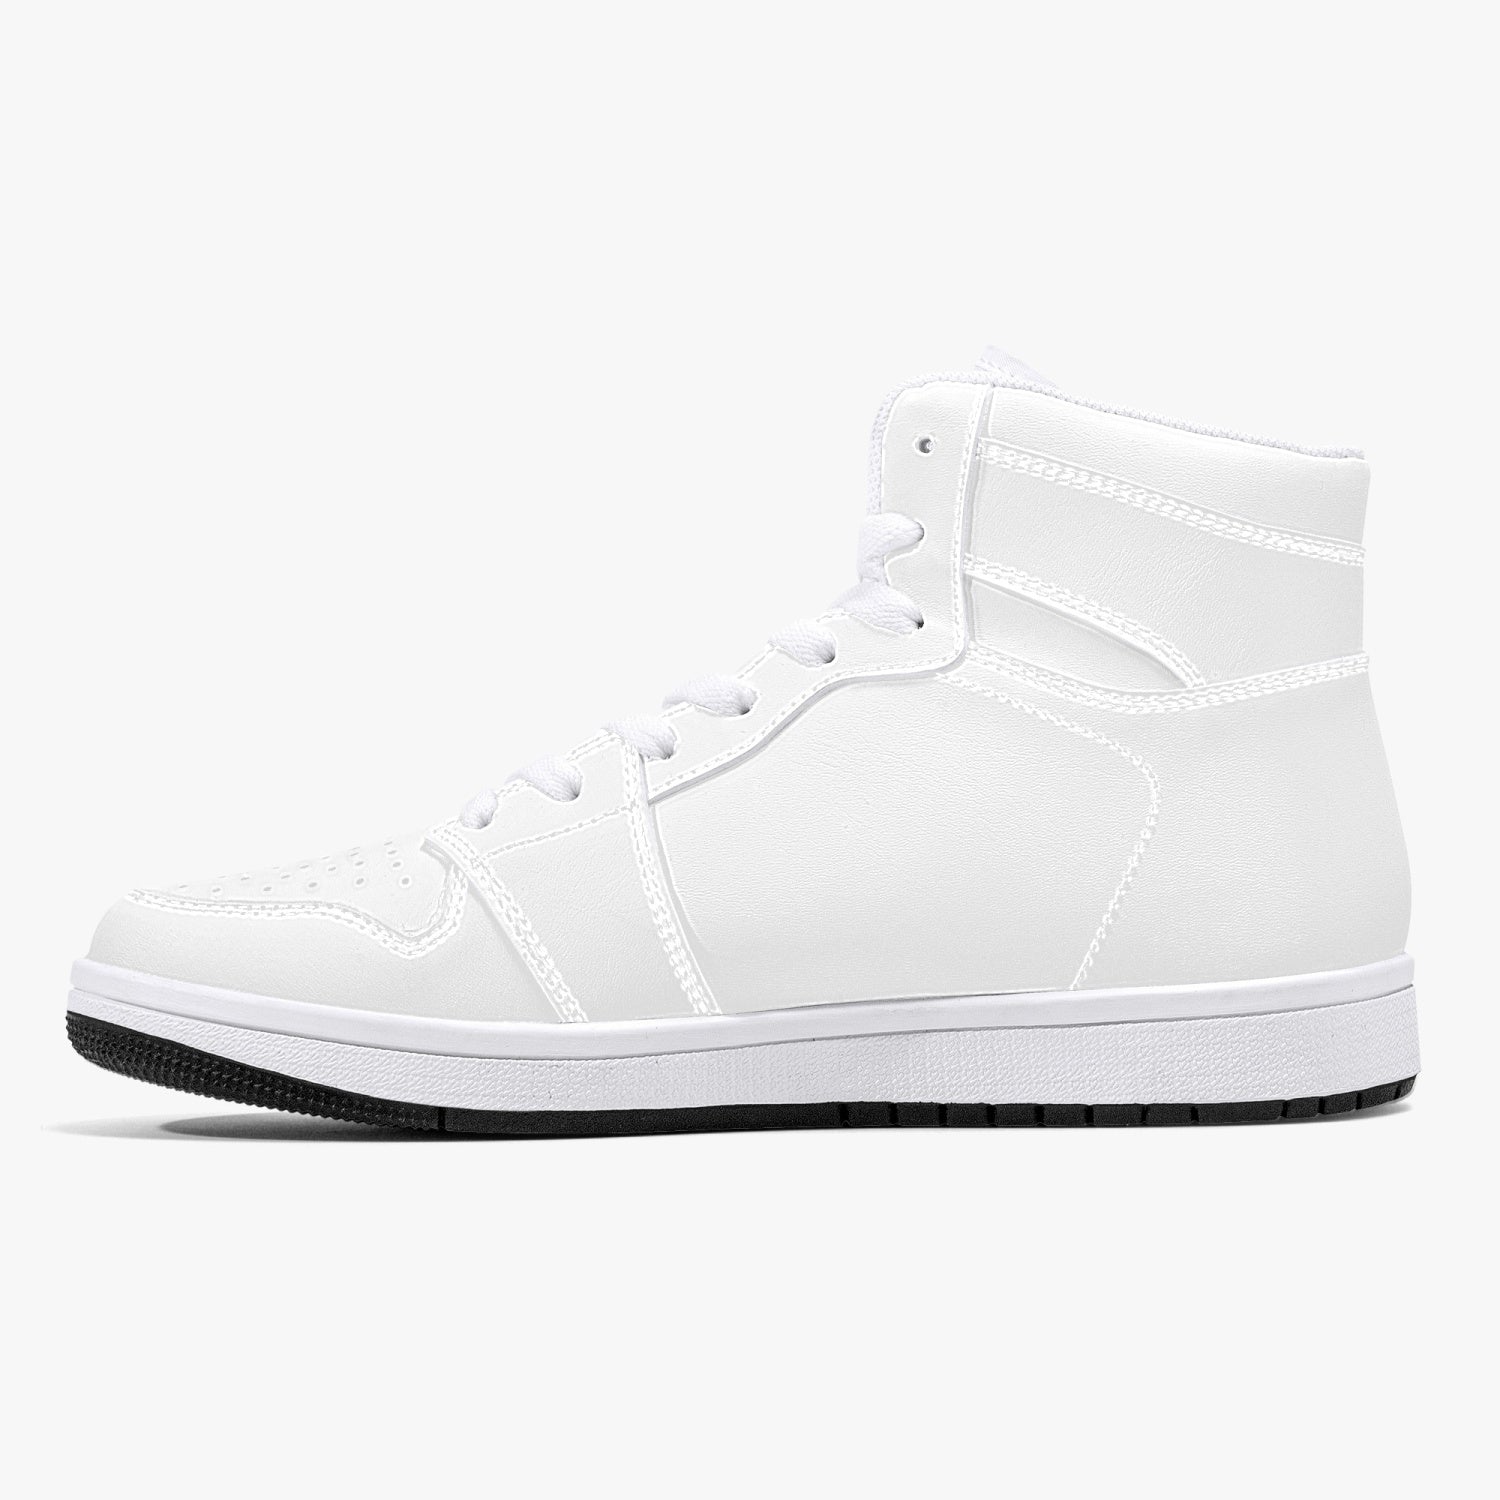 blksh High-Top Leather Sneakers - White / Black